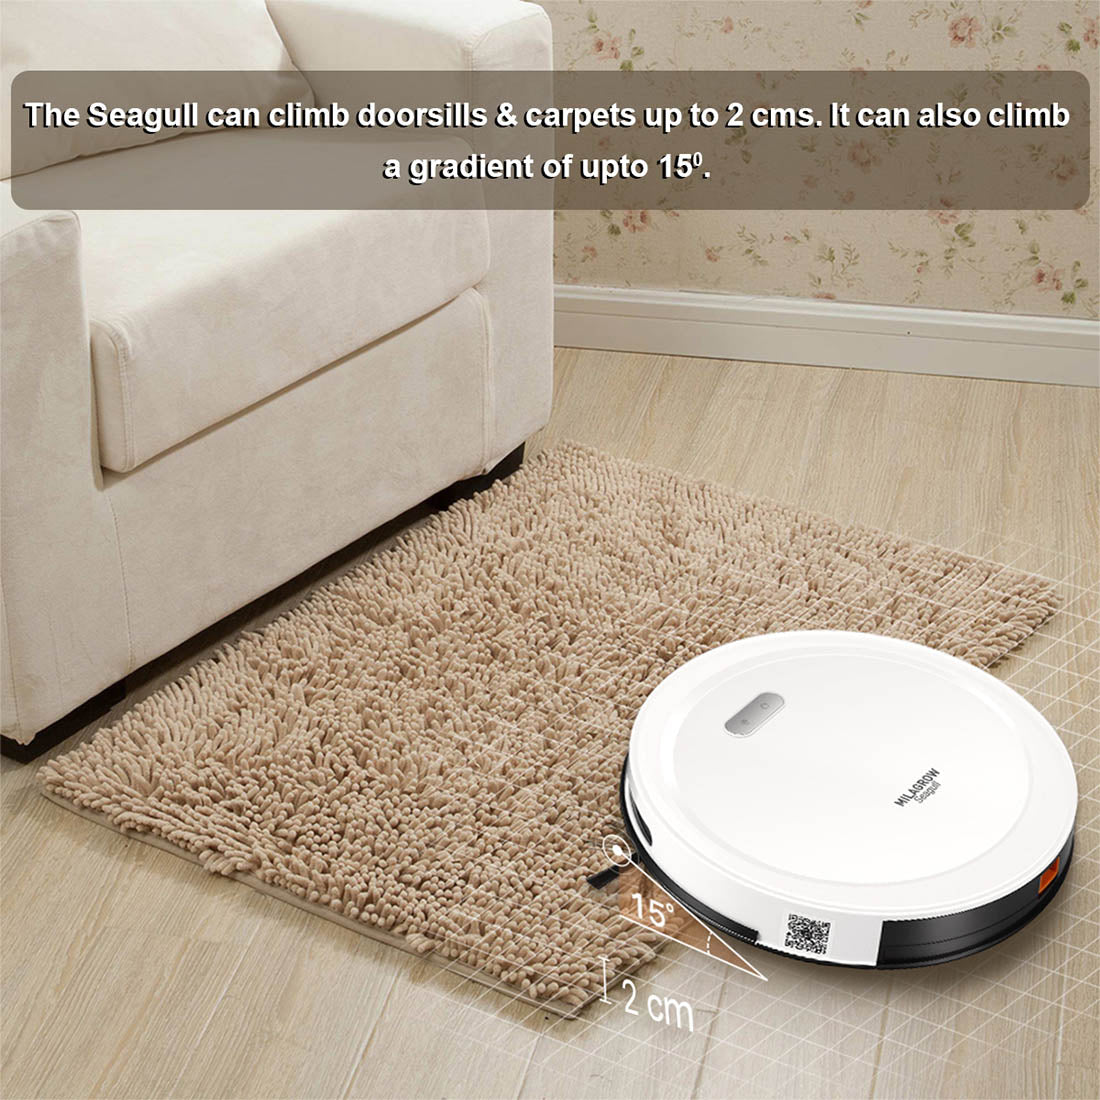 Milagrow Seagull Joy Full Dry and Slight Wet Mopping Robotic Vacuum Cleaner with Scheduling and Self-Charging